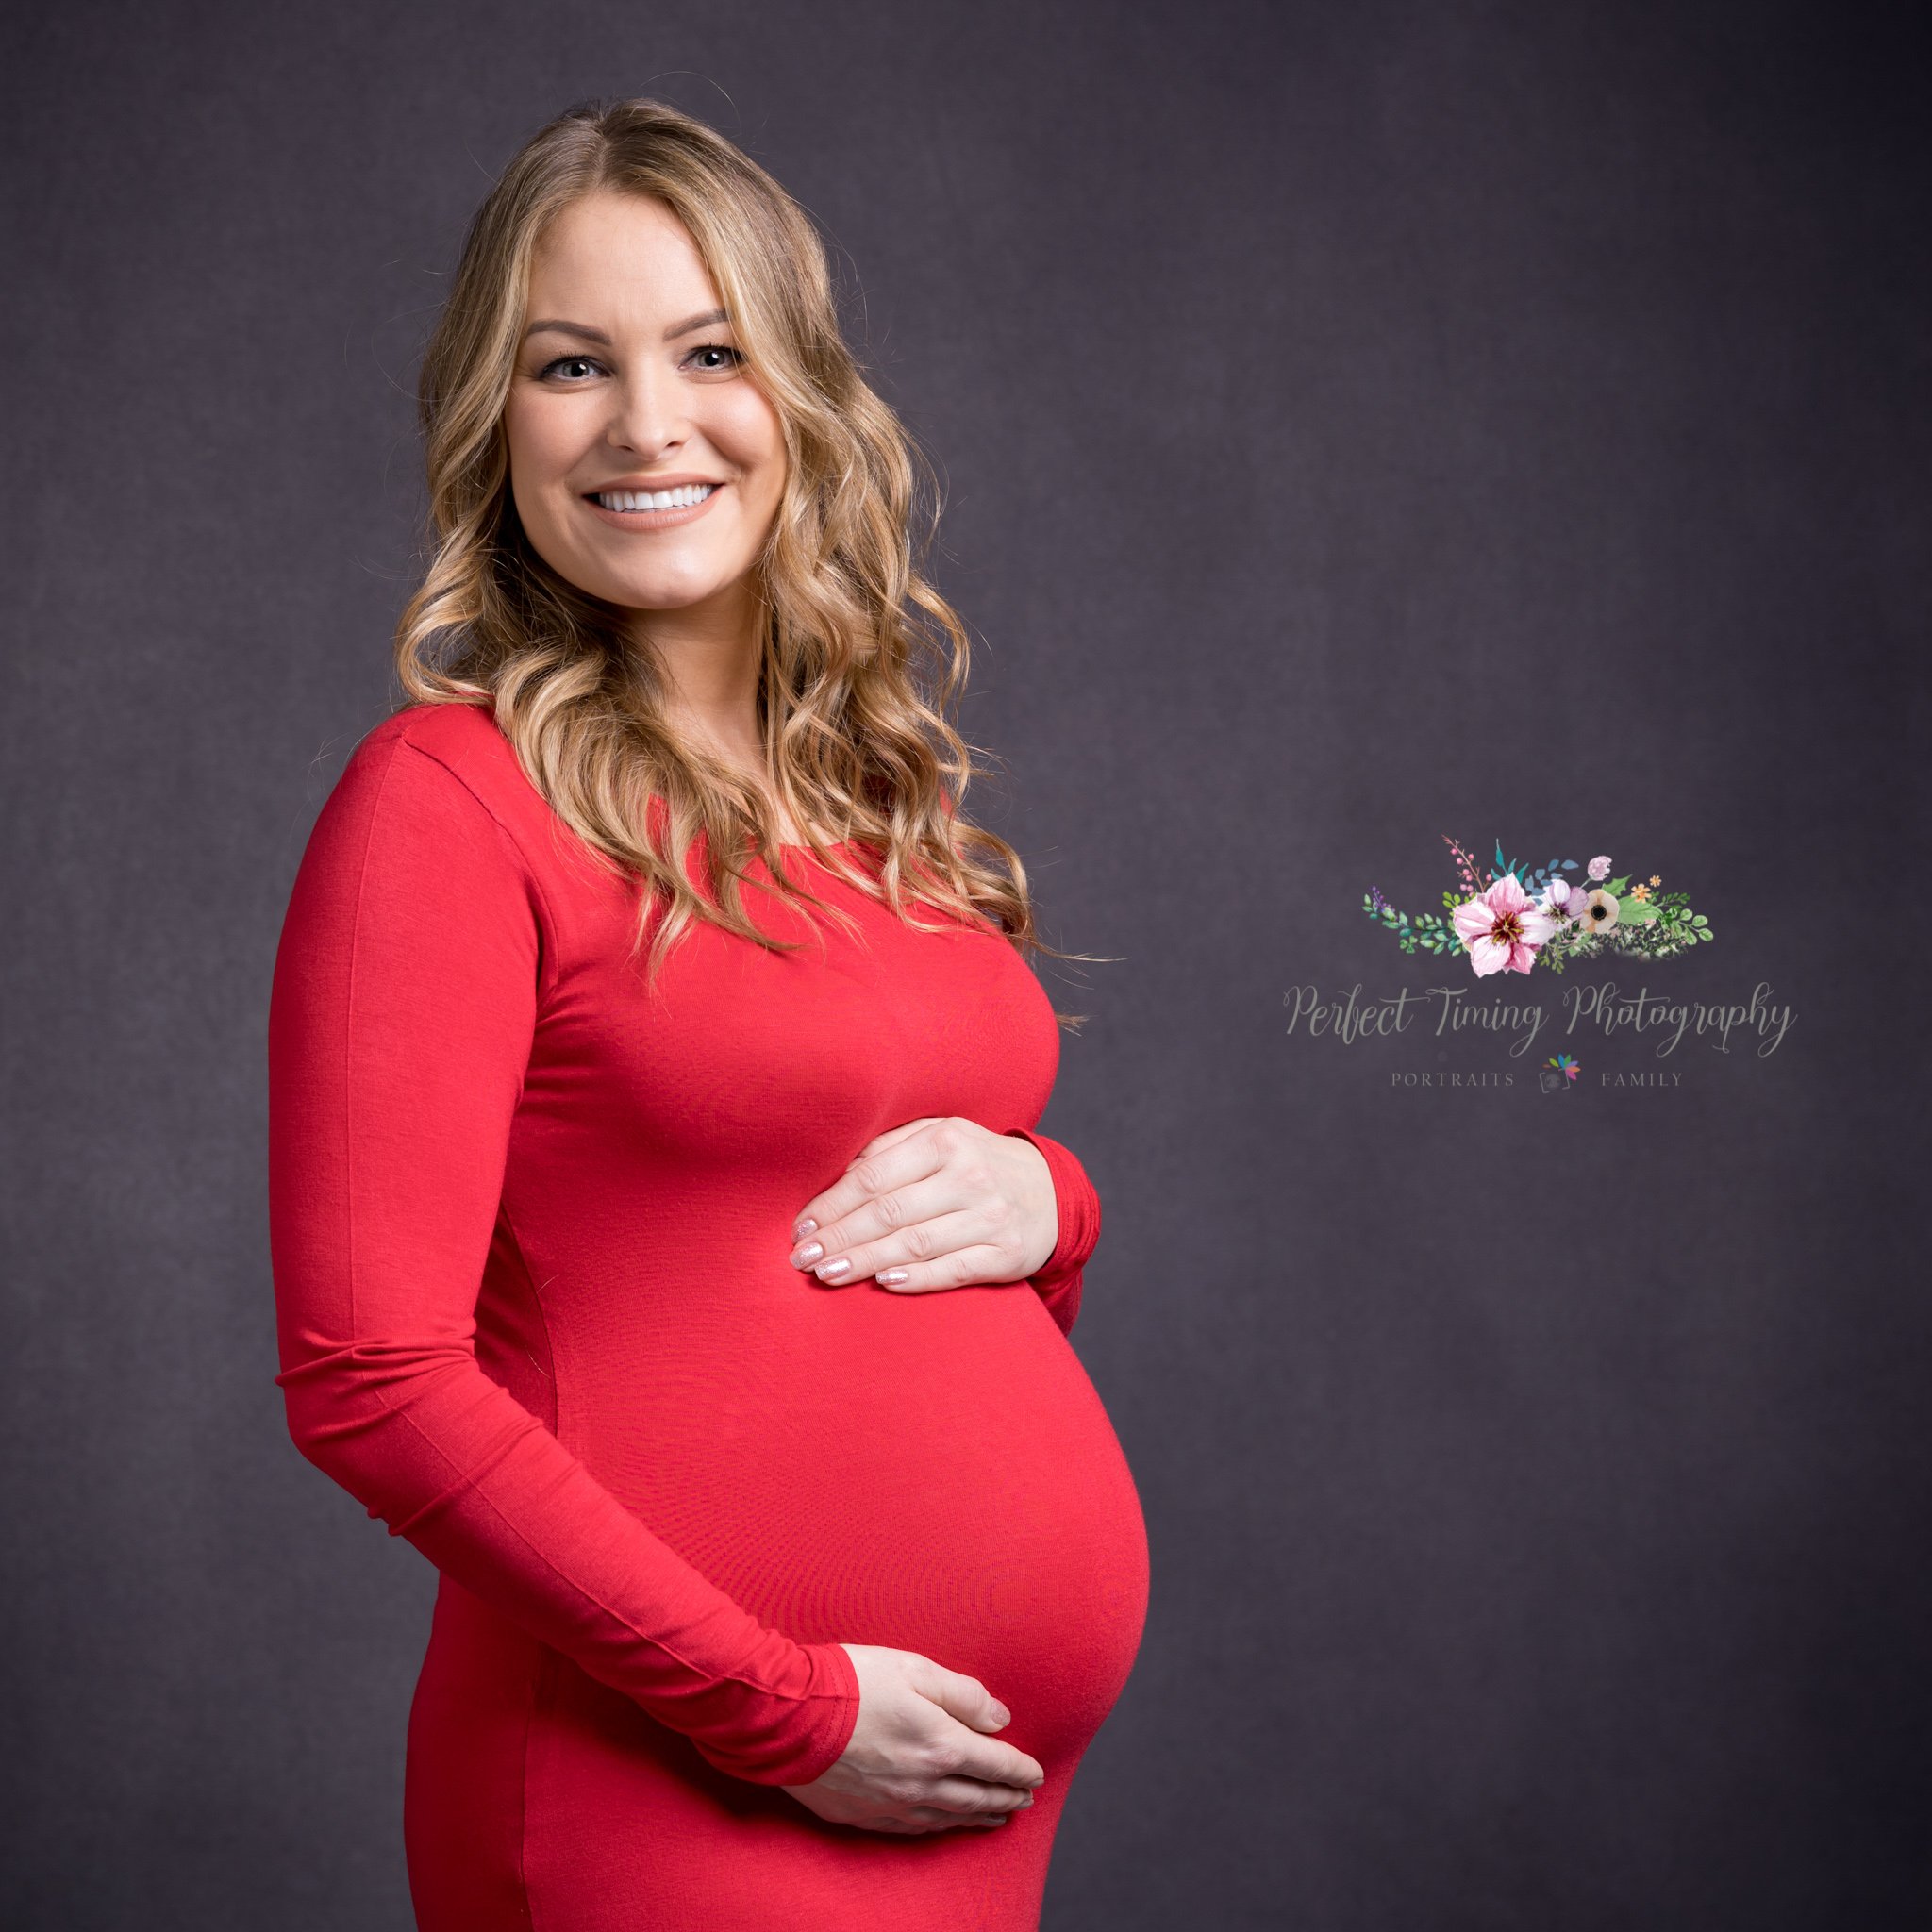 Maternity_Perfect Timing Photography_007.jpg